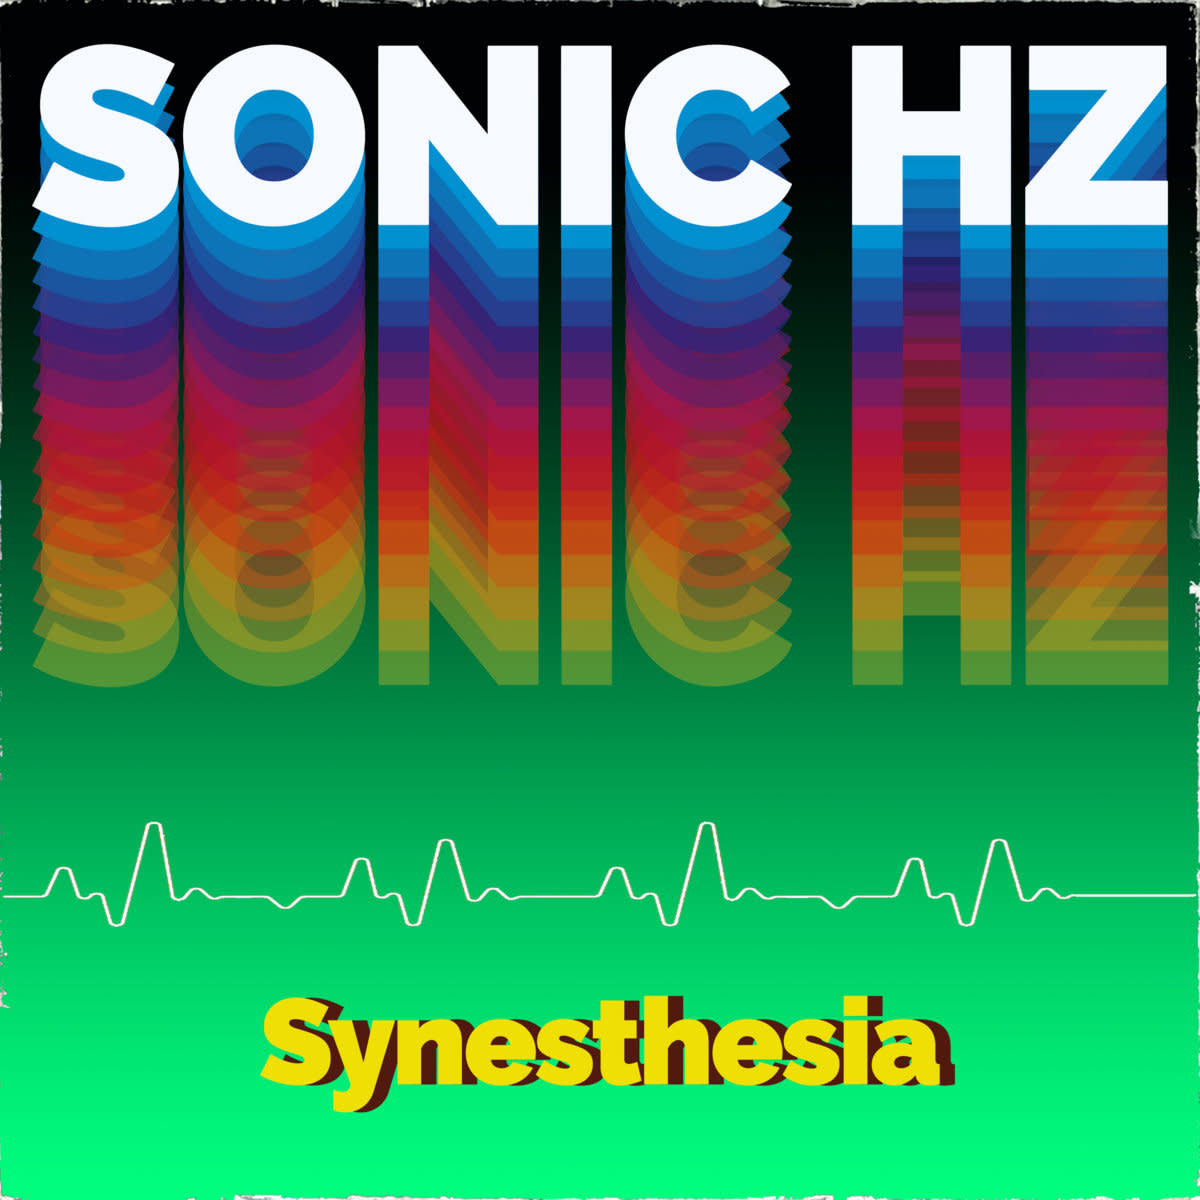 synth-album-review-synesthesia-by-sonic-hz